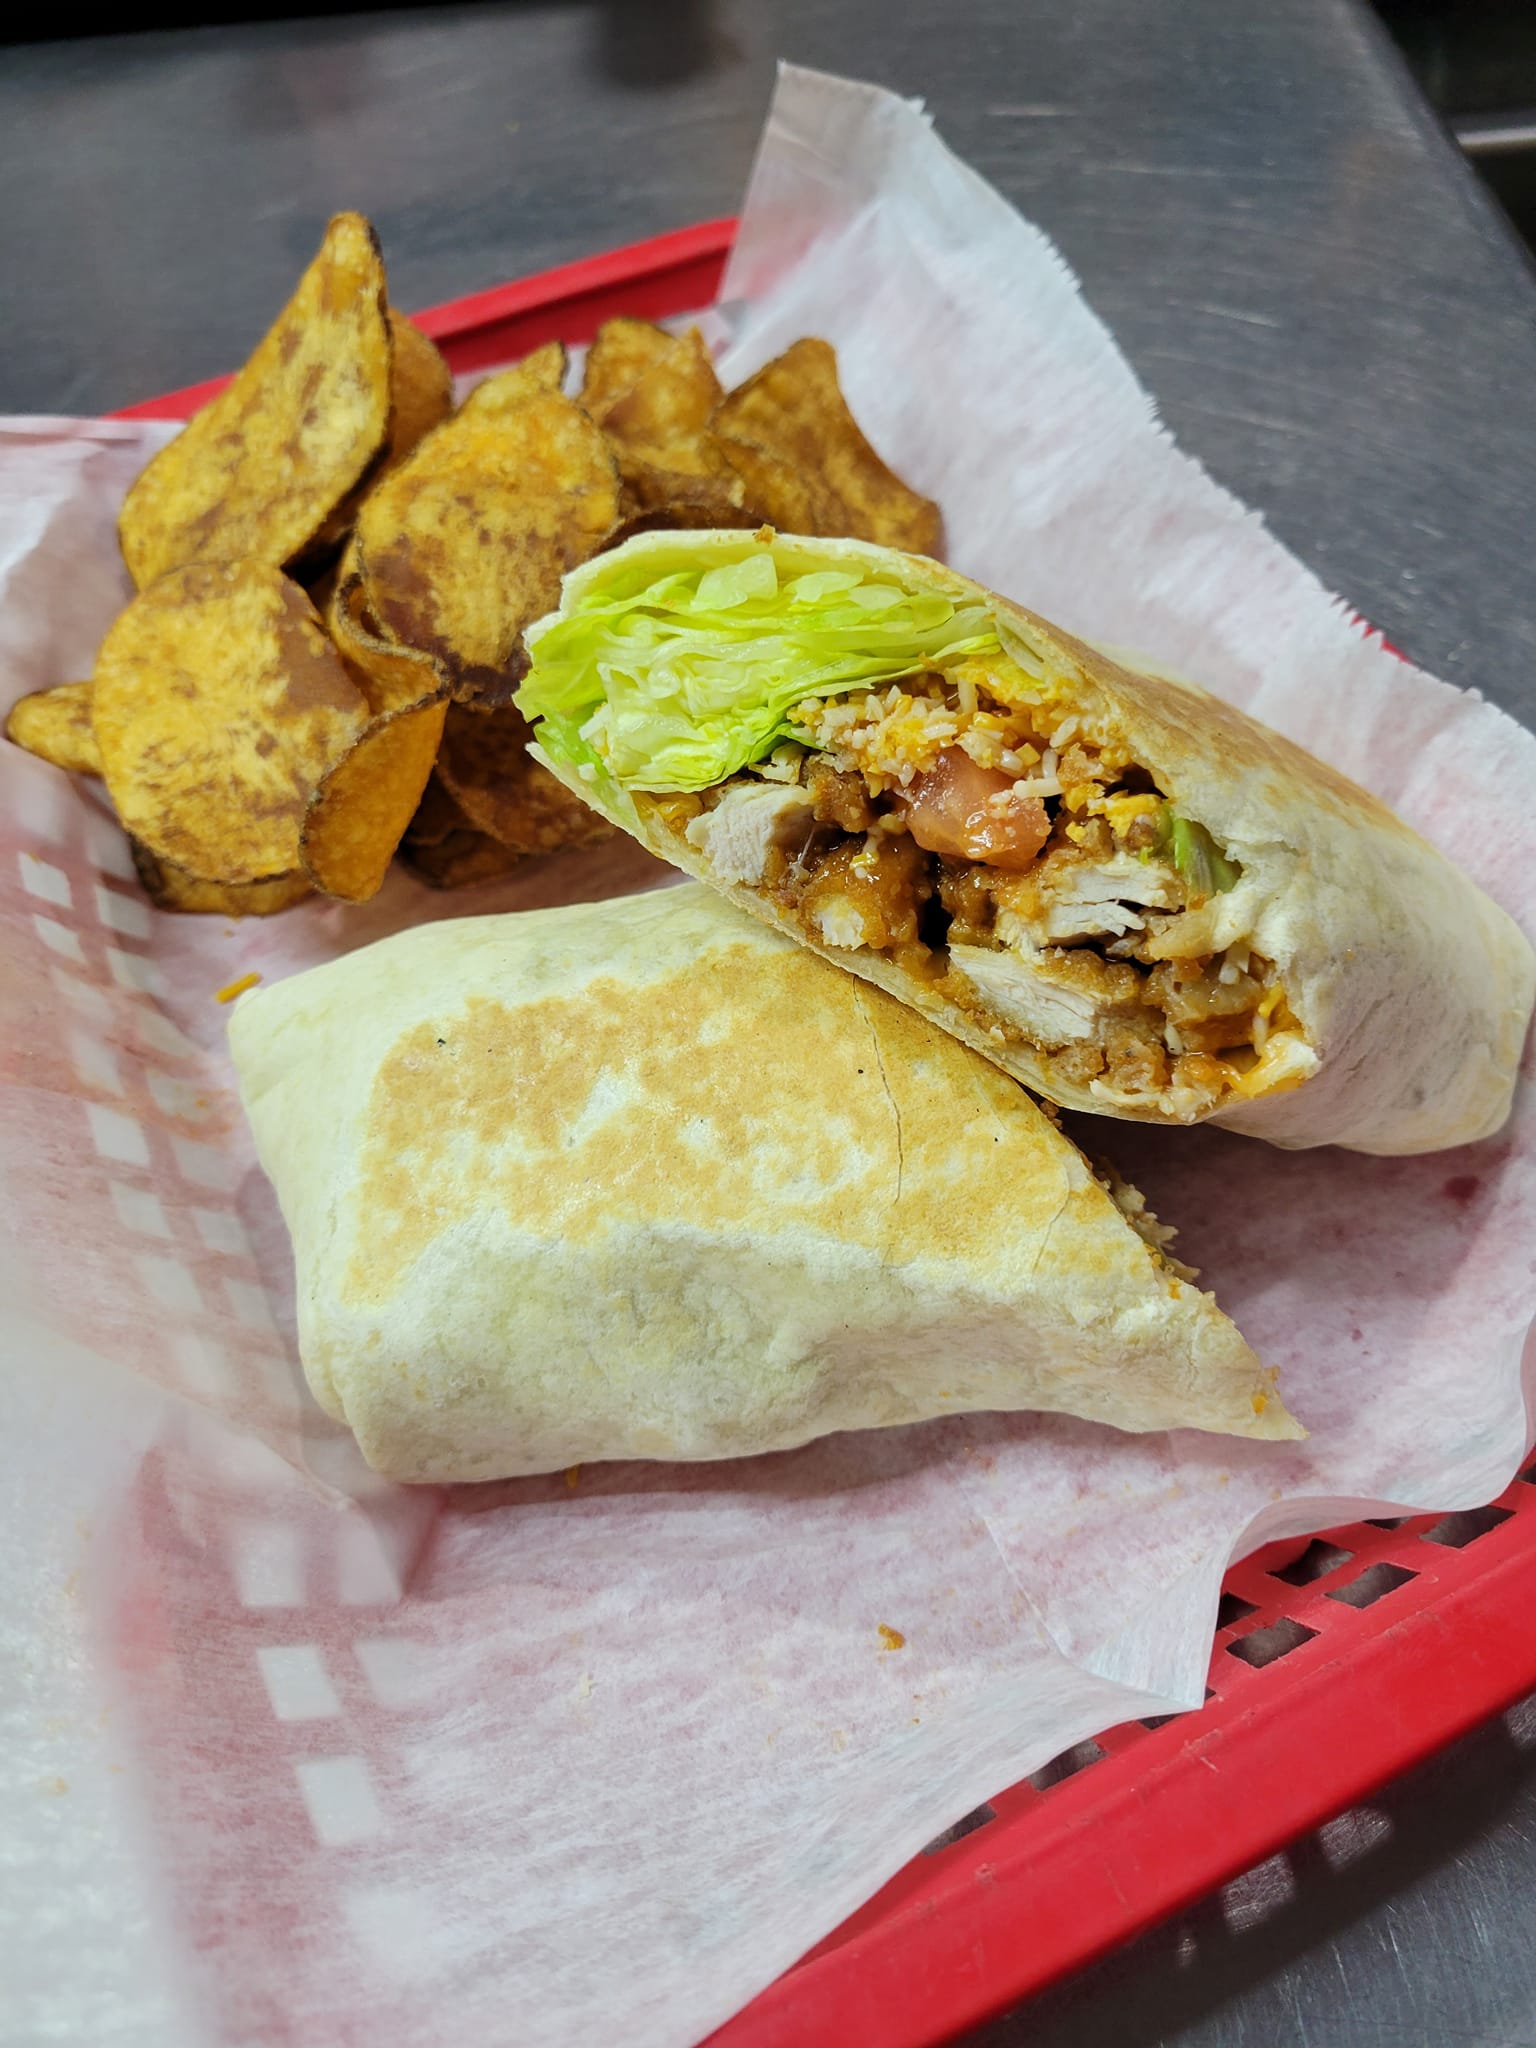 Buffalo chicken wrap and homemade chips from Pia's Sports Bar & Grill.